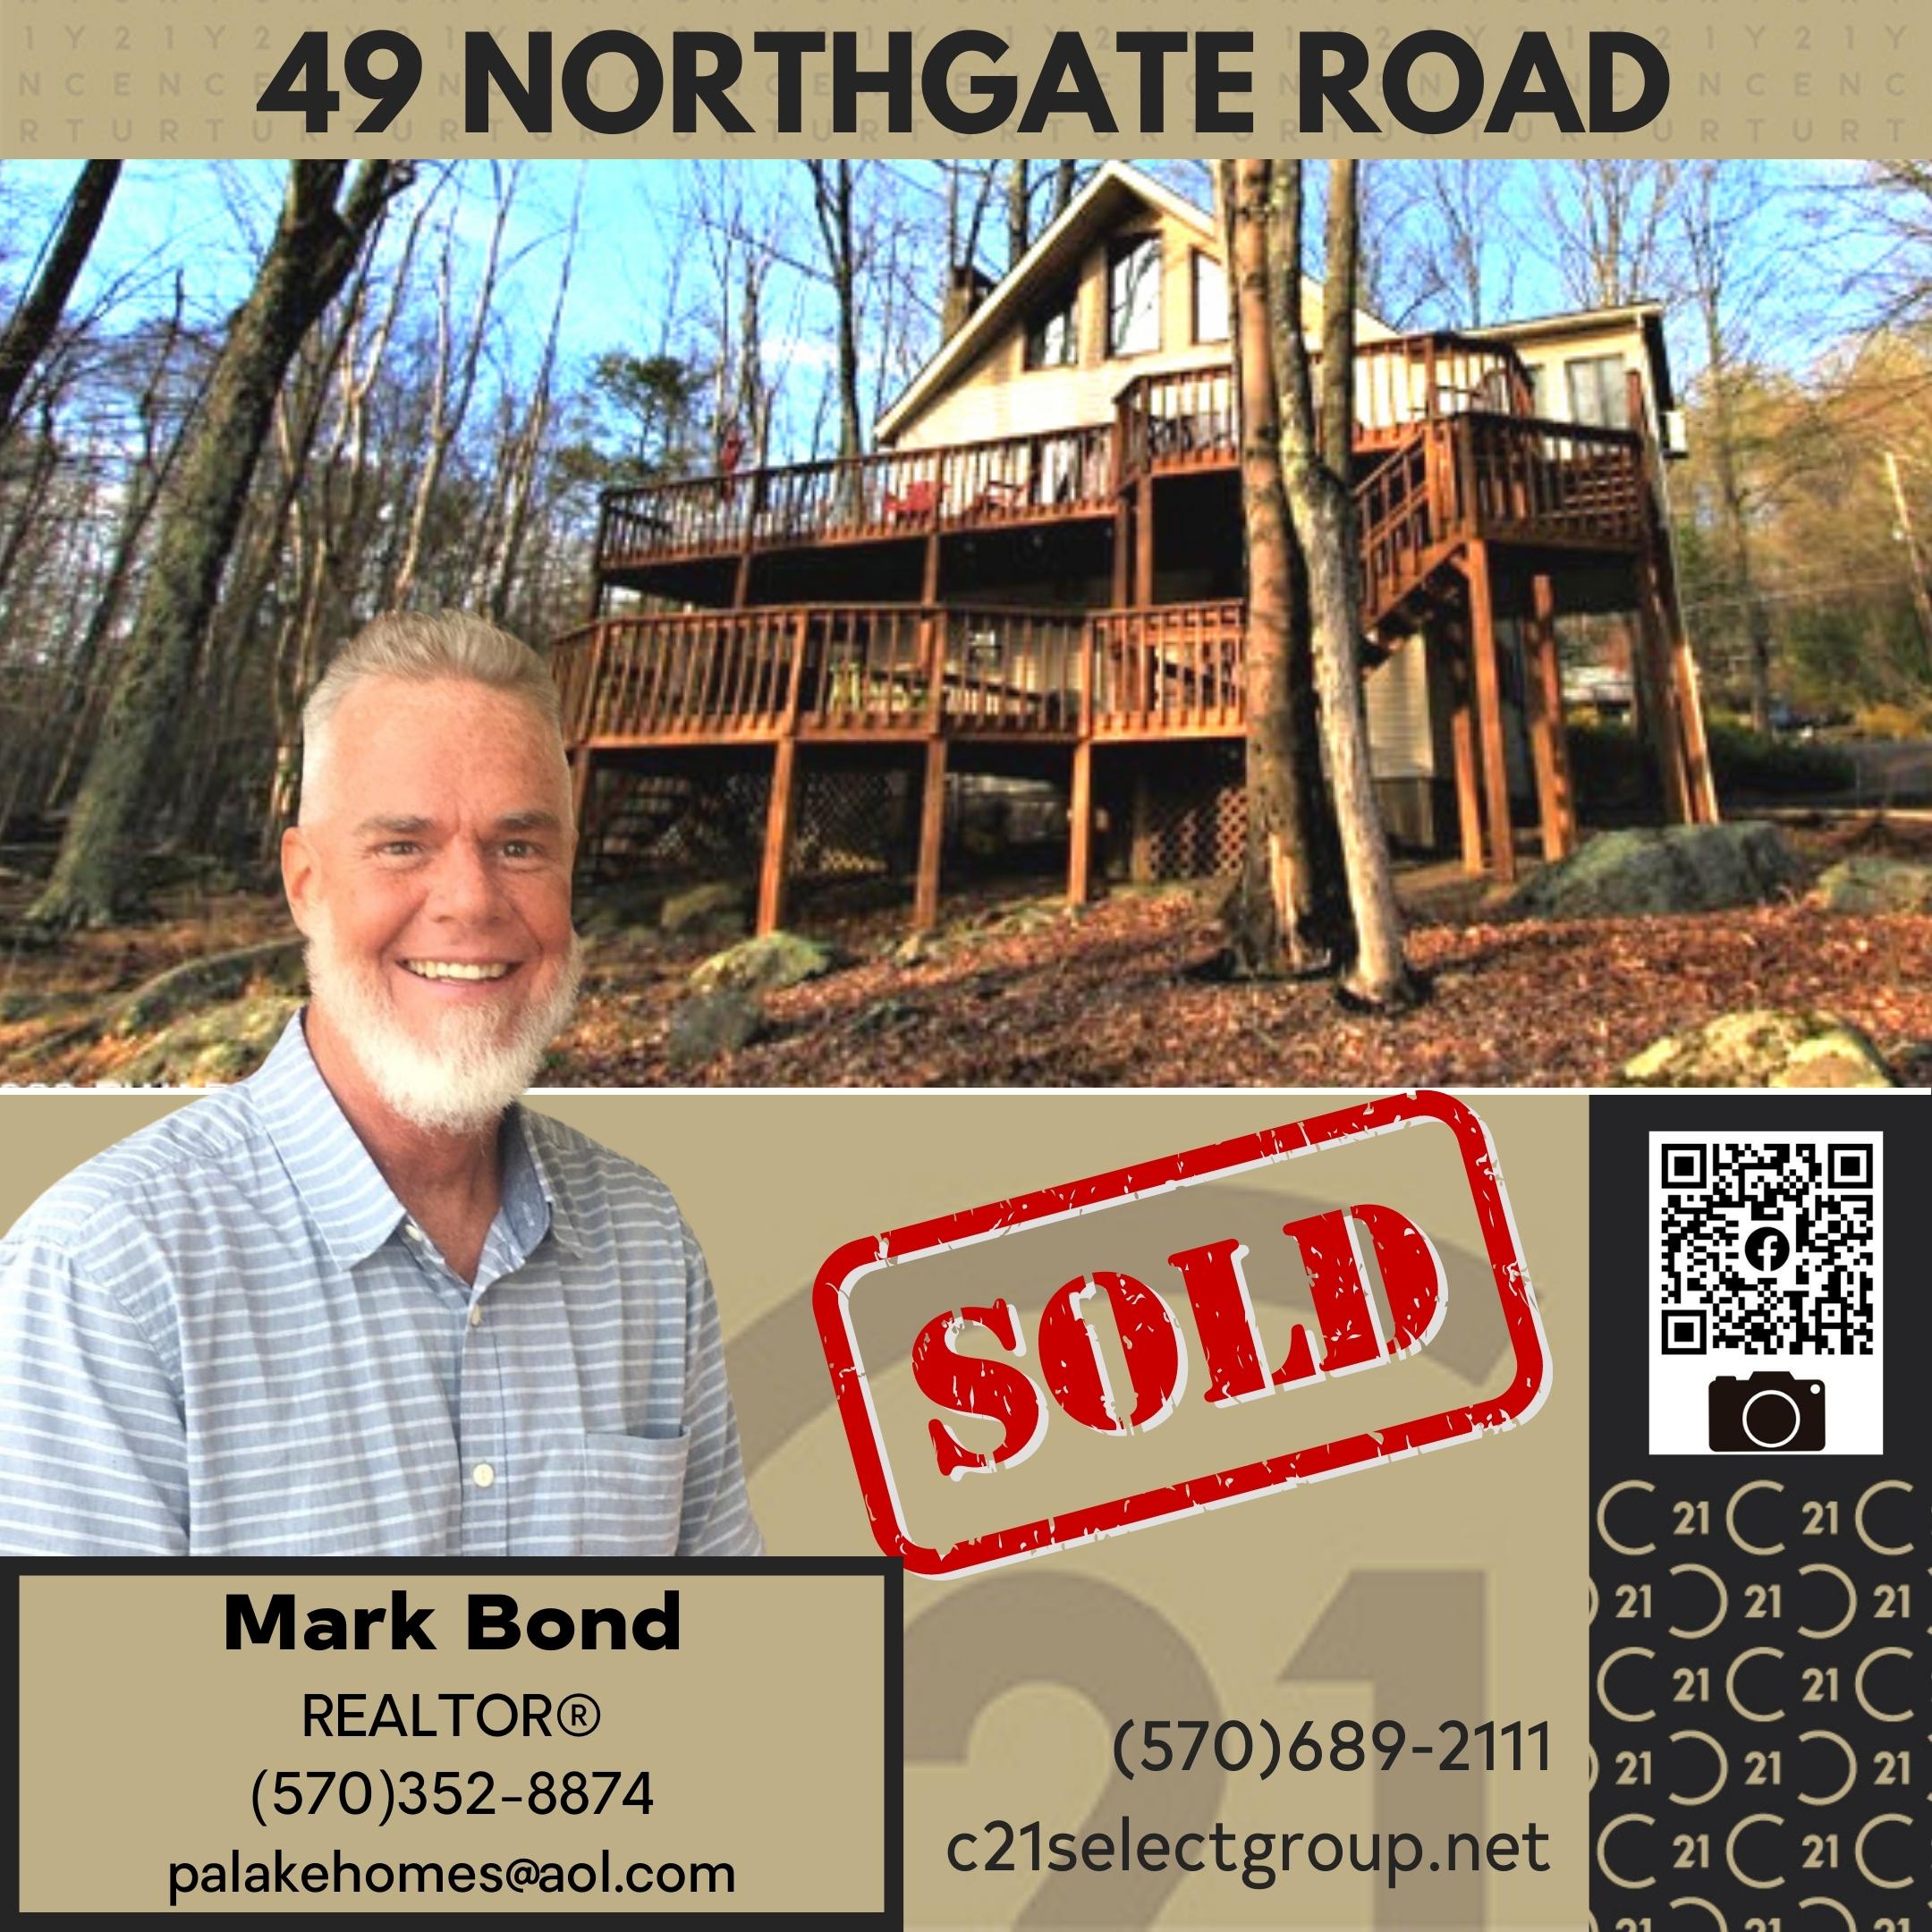 SOLD! 49 Northgate Road: The Hideout